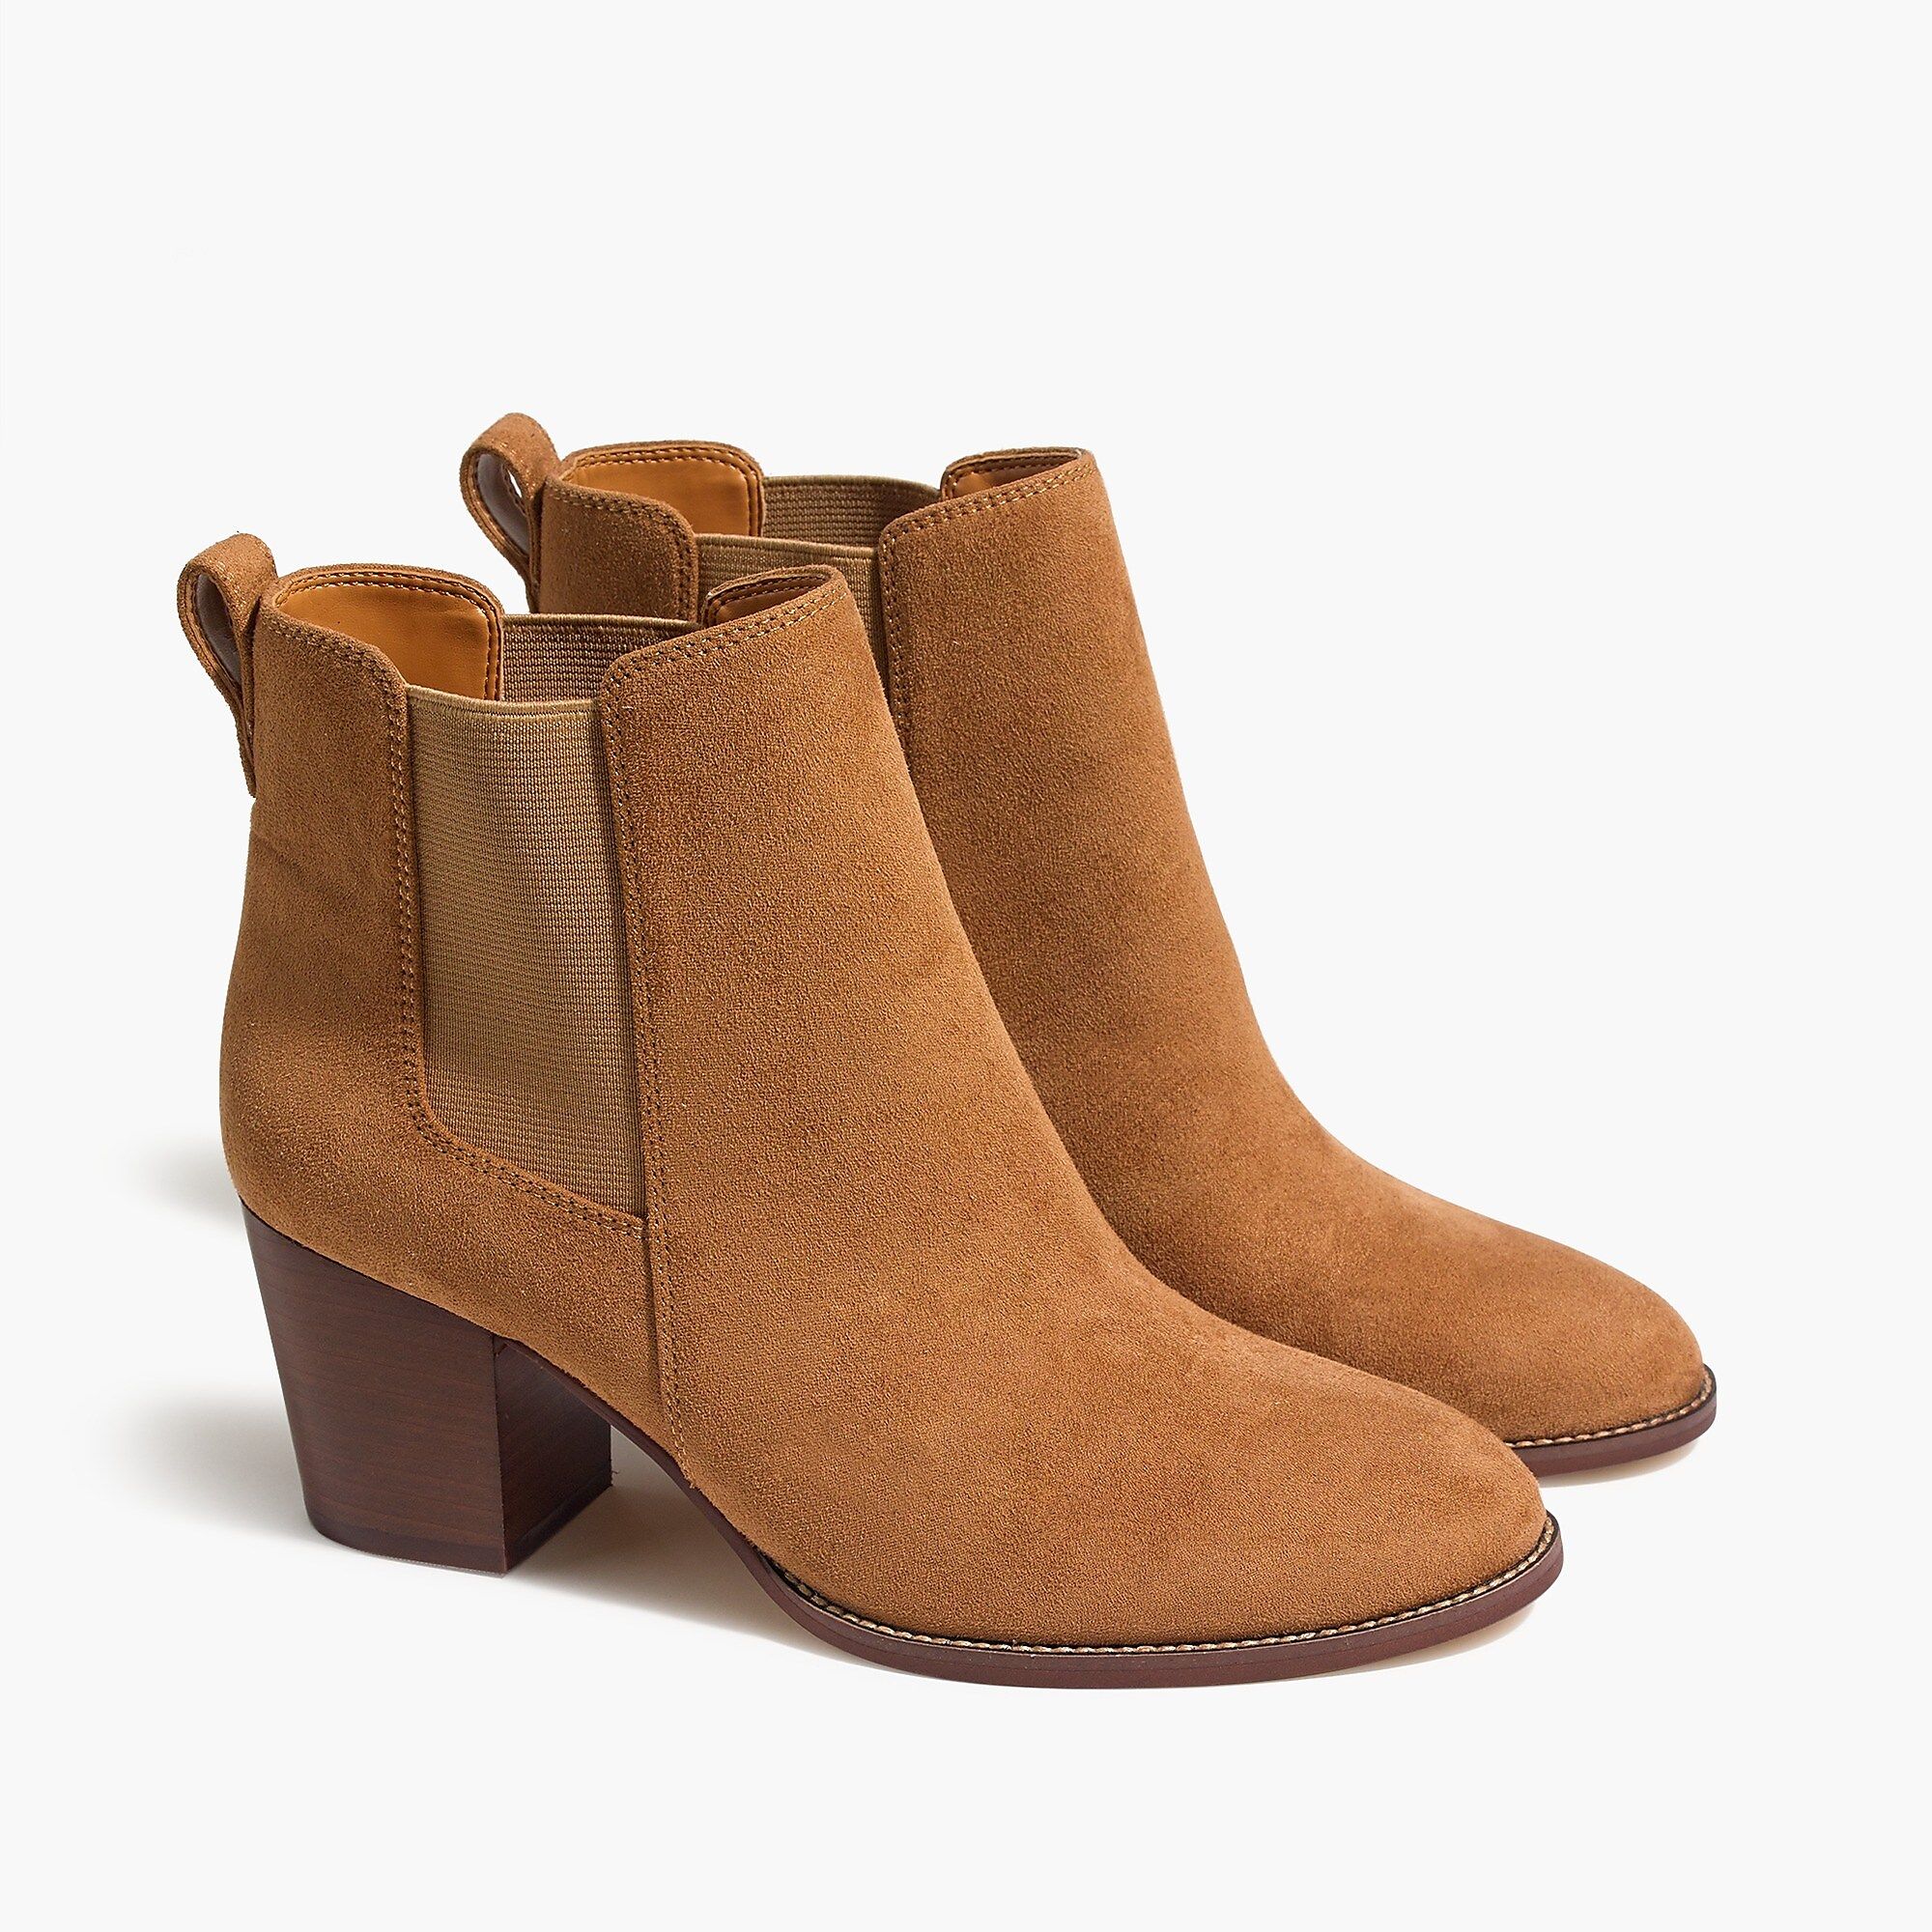 Rory microsuede heeled boots | J.Crew Factory